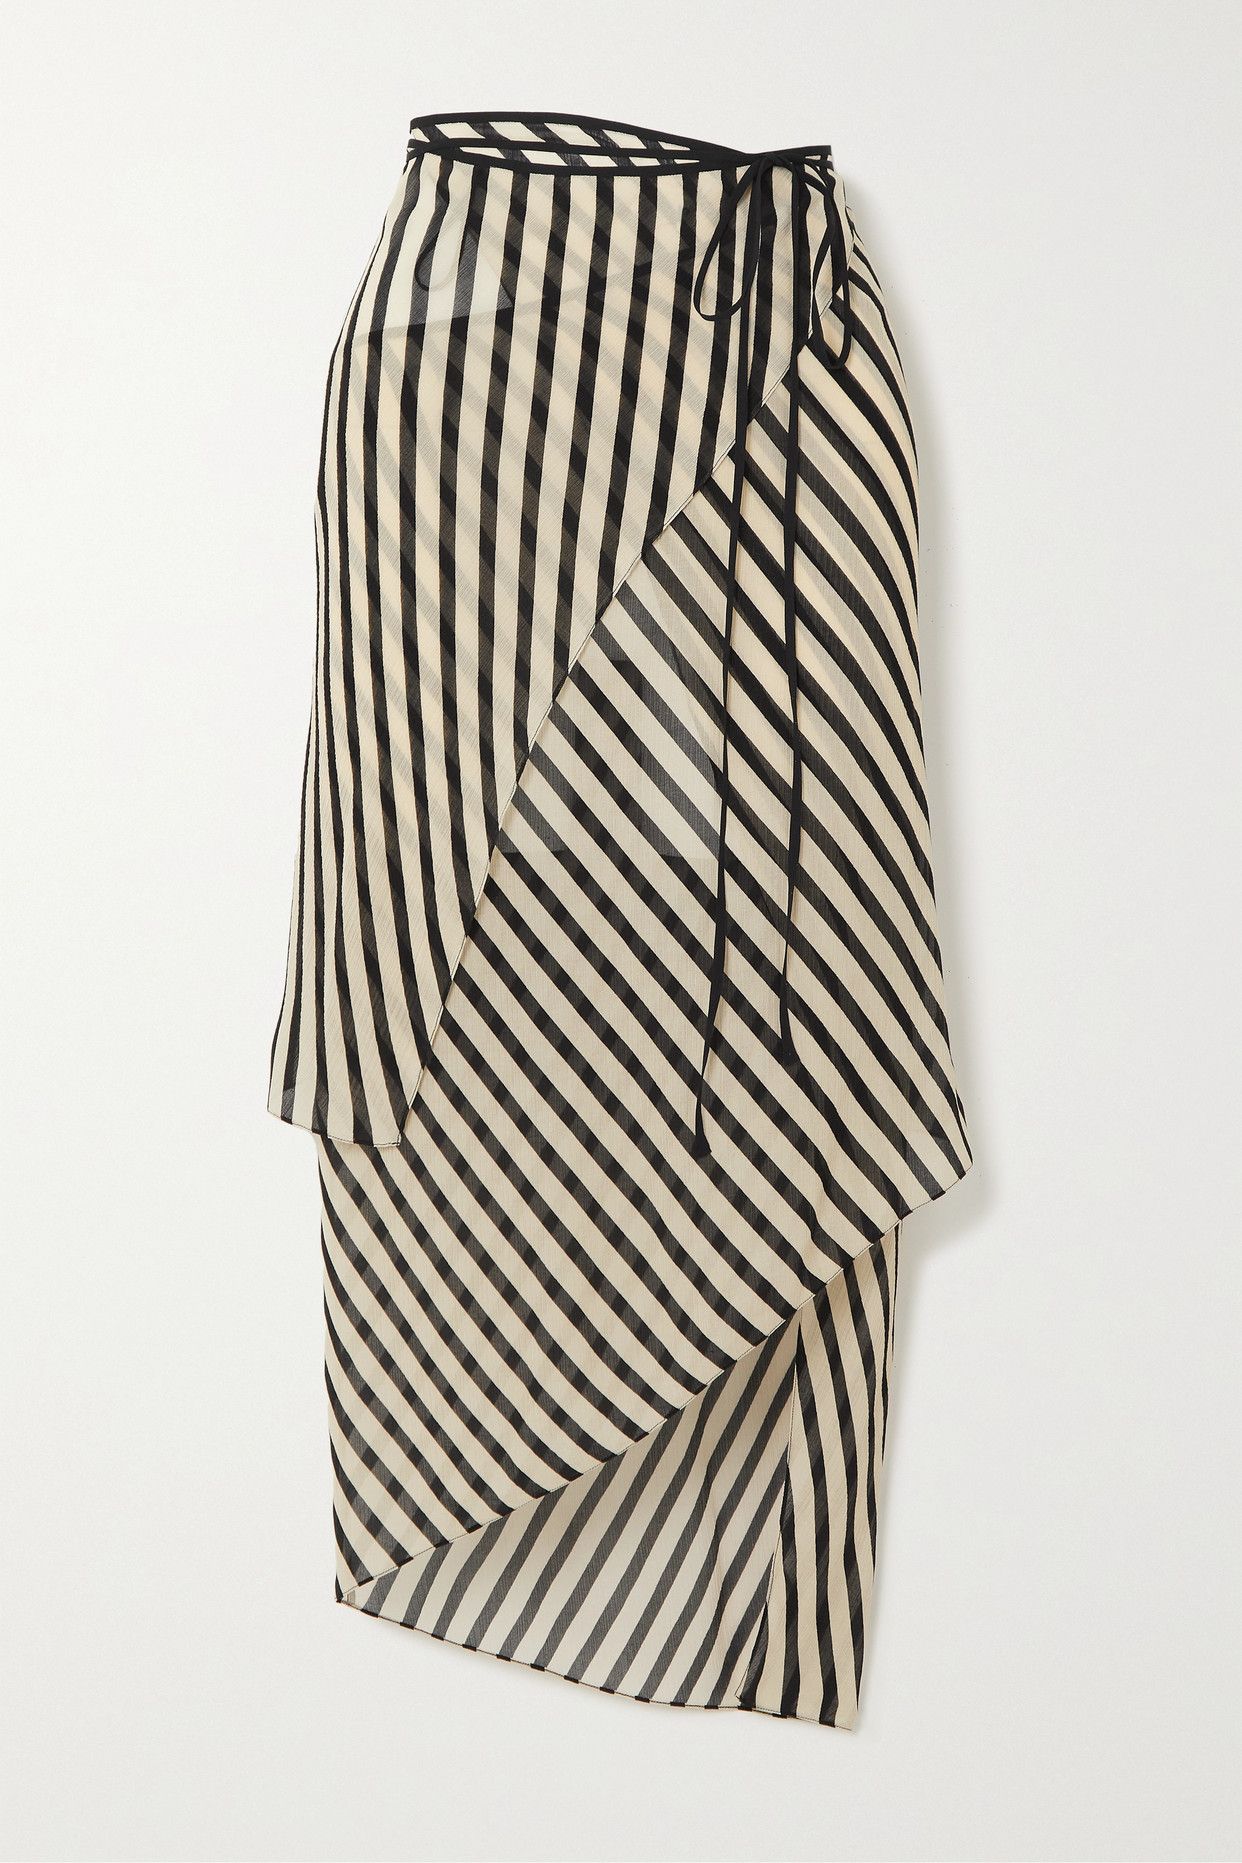 Striped Skirts: Embrace Timeless Style with Chic and Versatile Striped Skirts